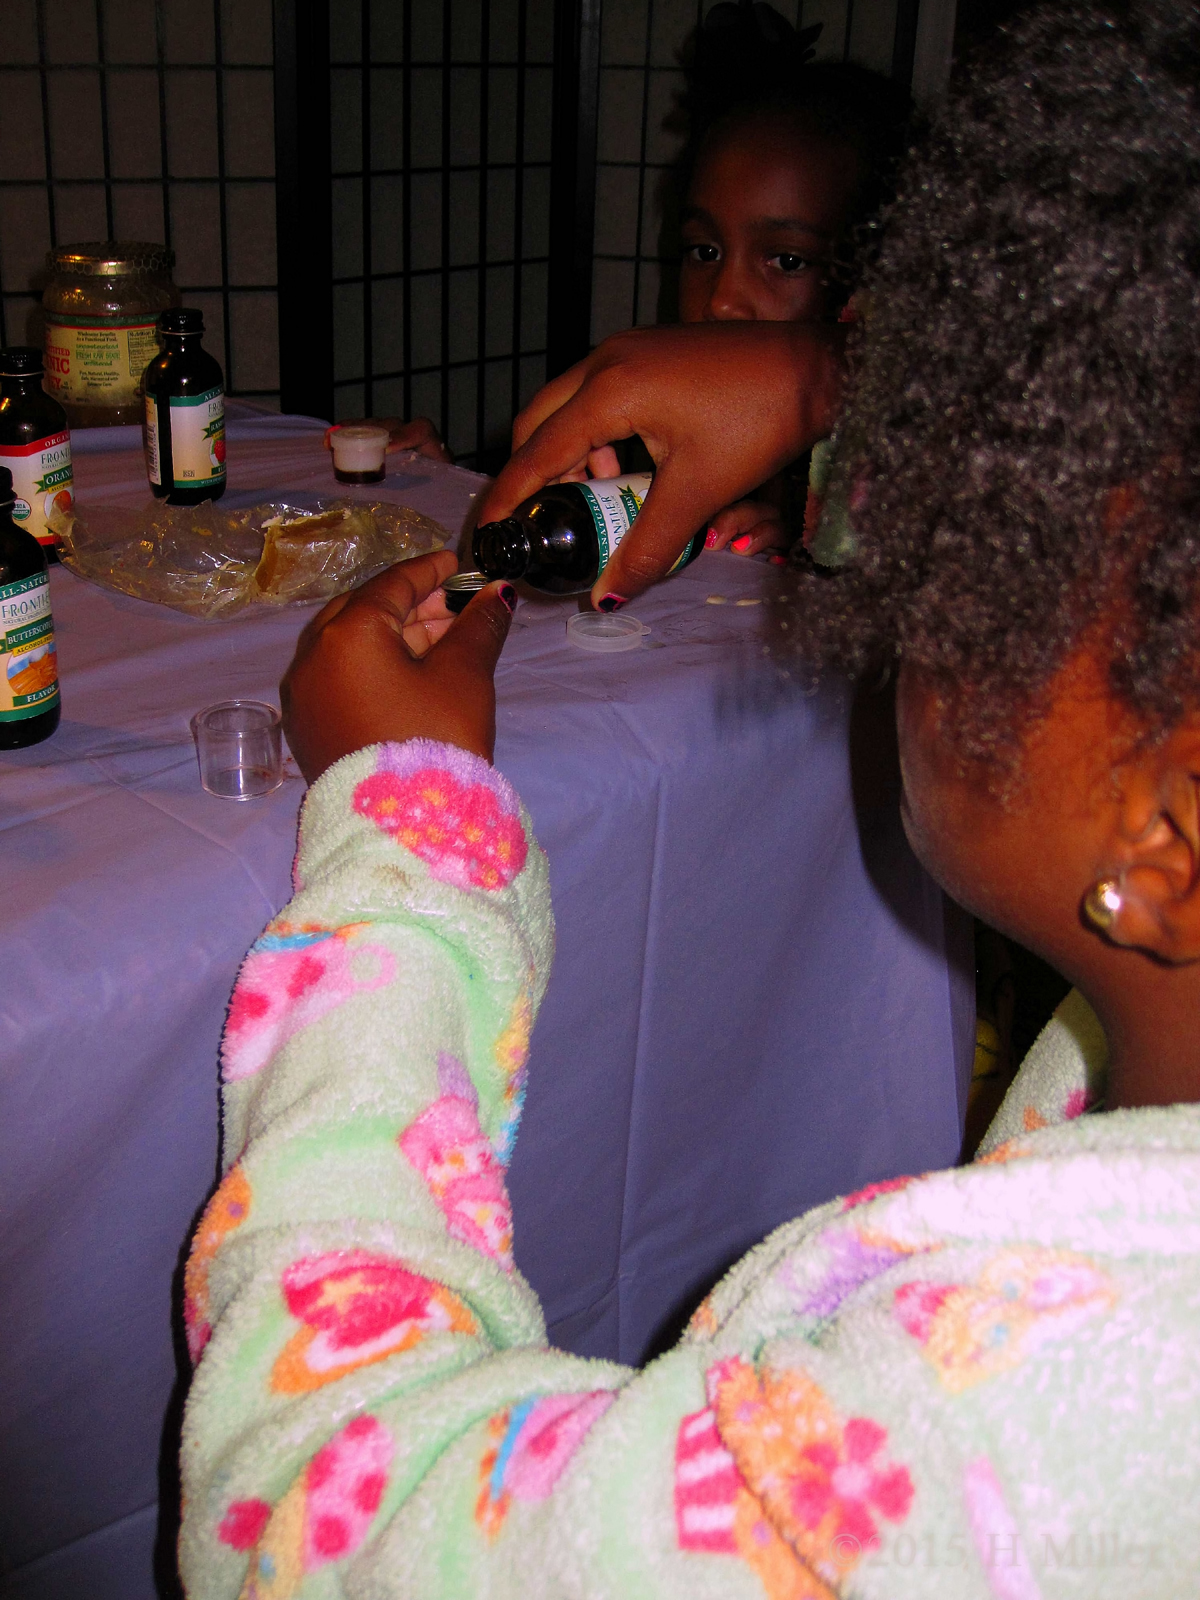 Carefully Pouring The Flavoring Out For The Lip Balm Carft.